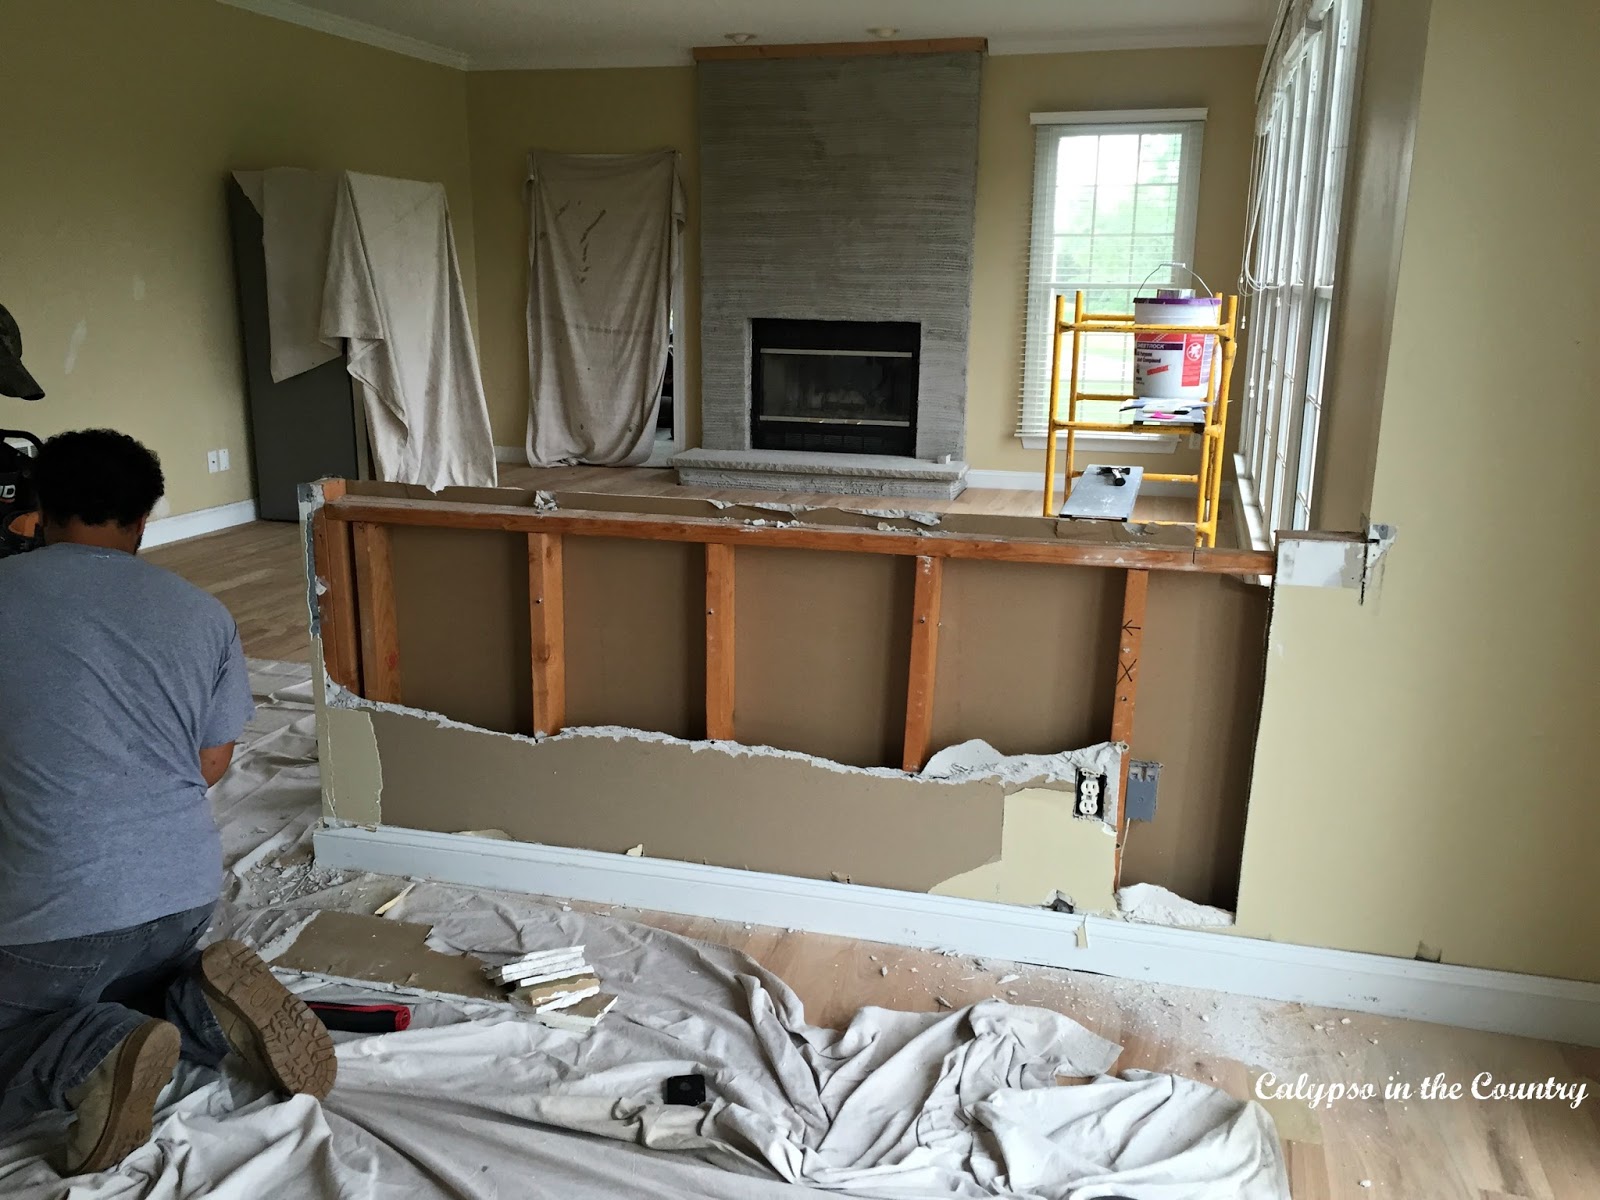 Tearing down the half wall separating the kitchen and family room